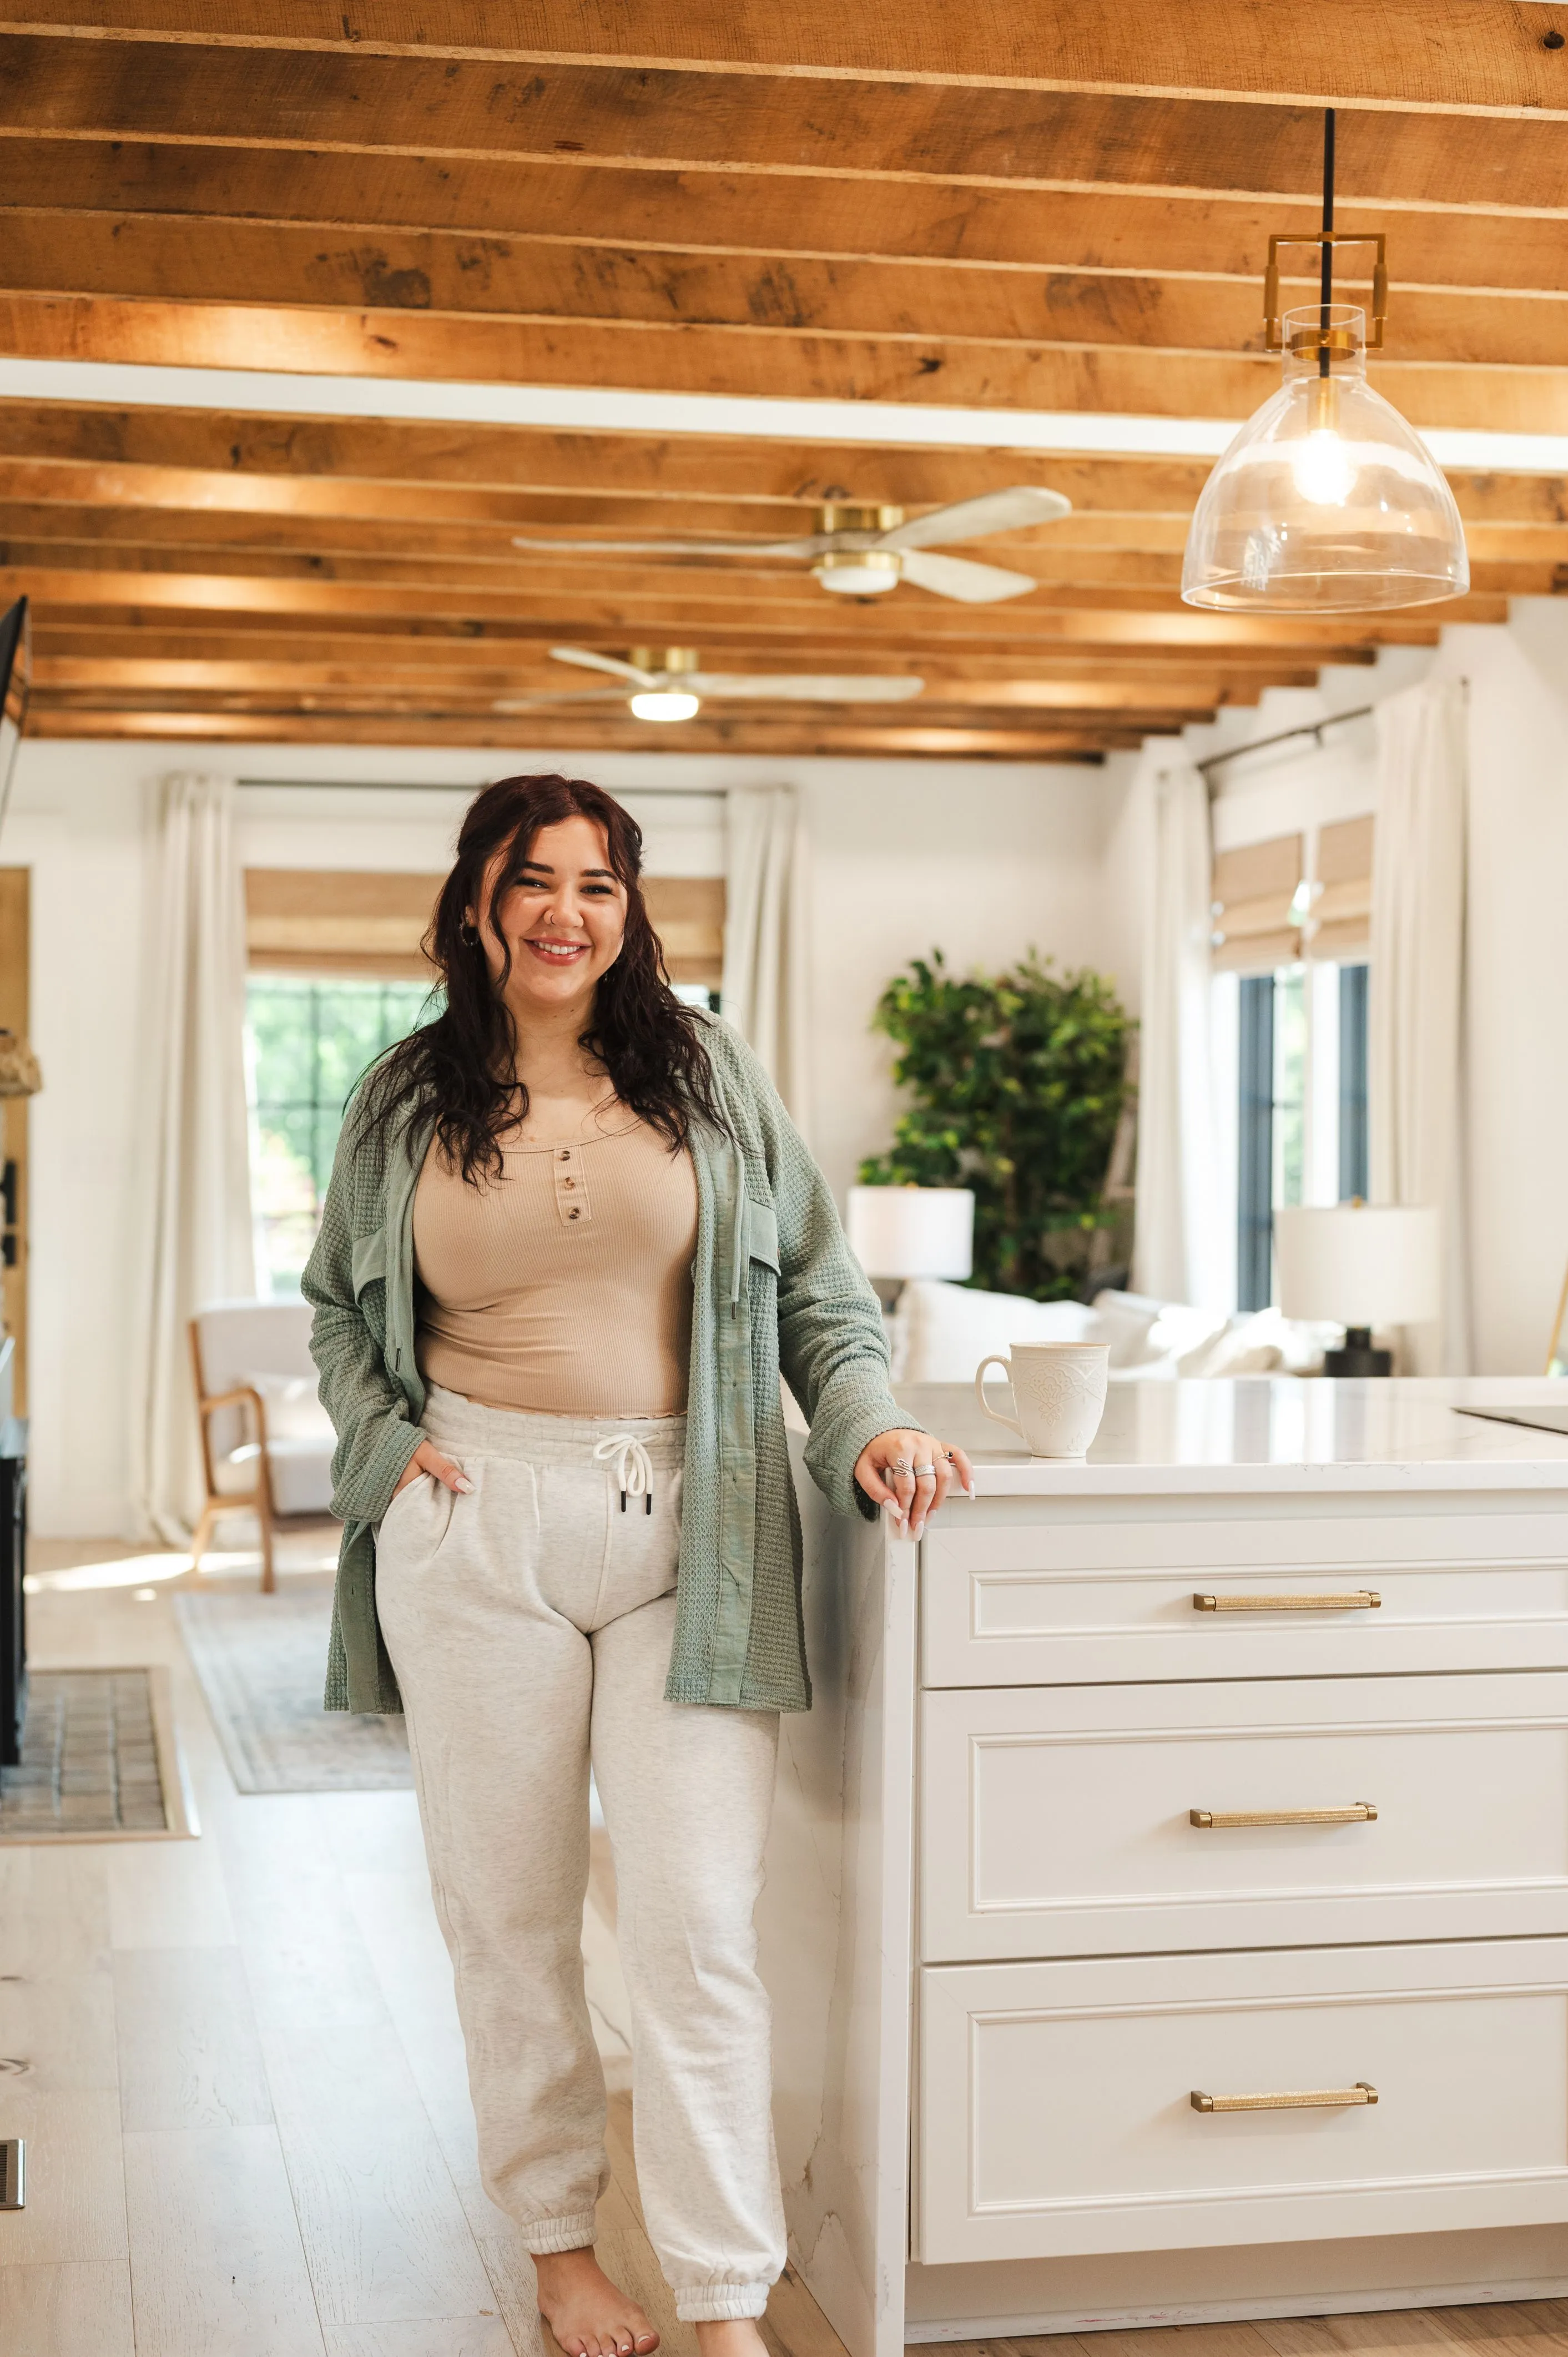 Woman smiling in a cozy home interior with exposed wooden ceiling beams, leaning on a kitchen island next to a white mug.